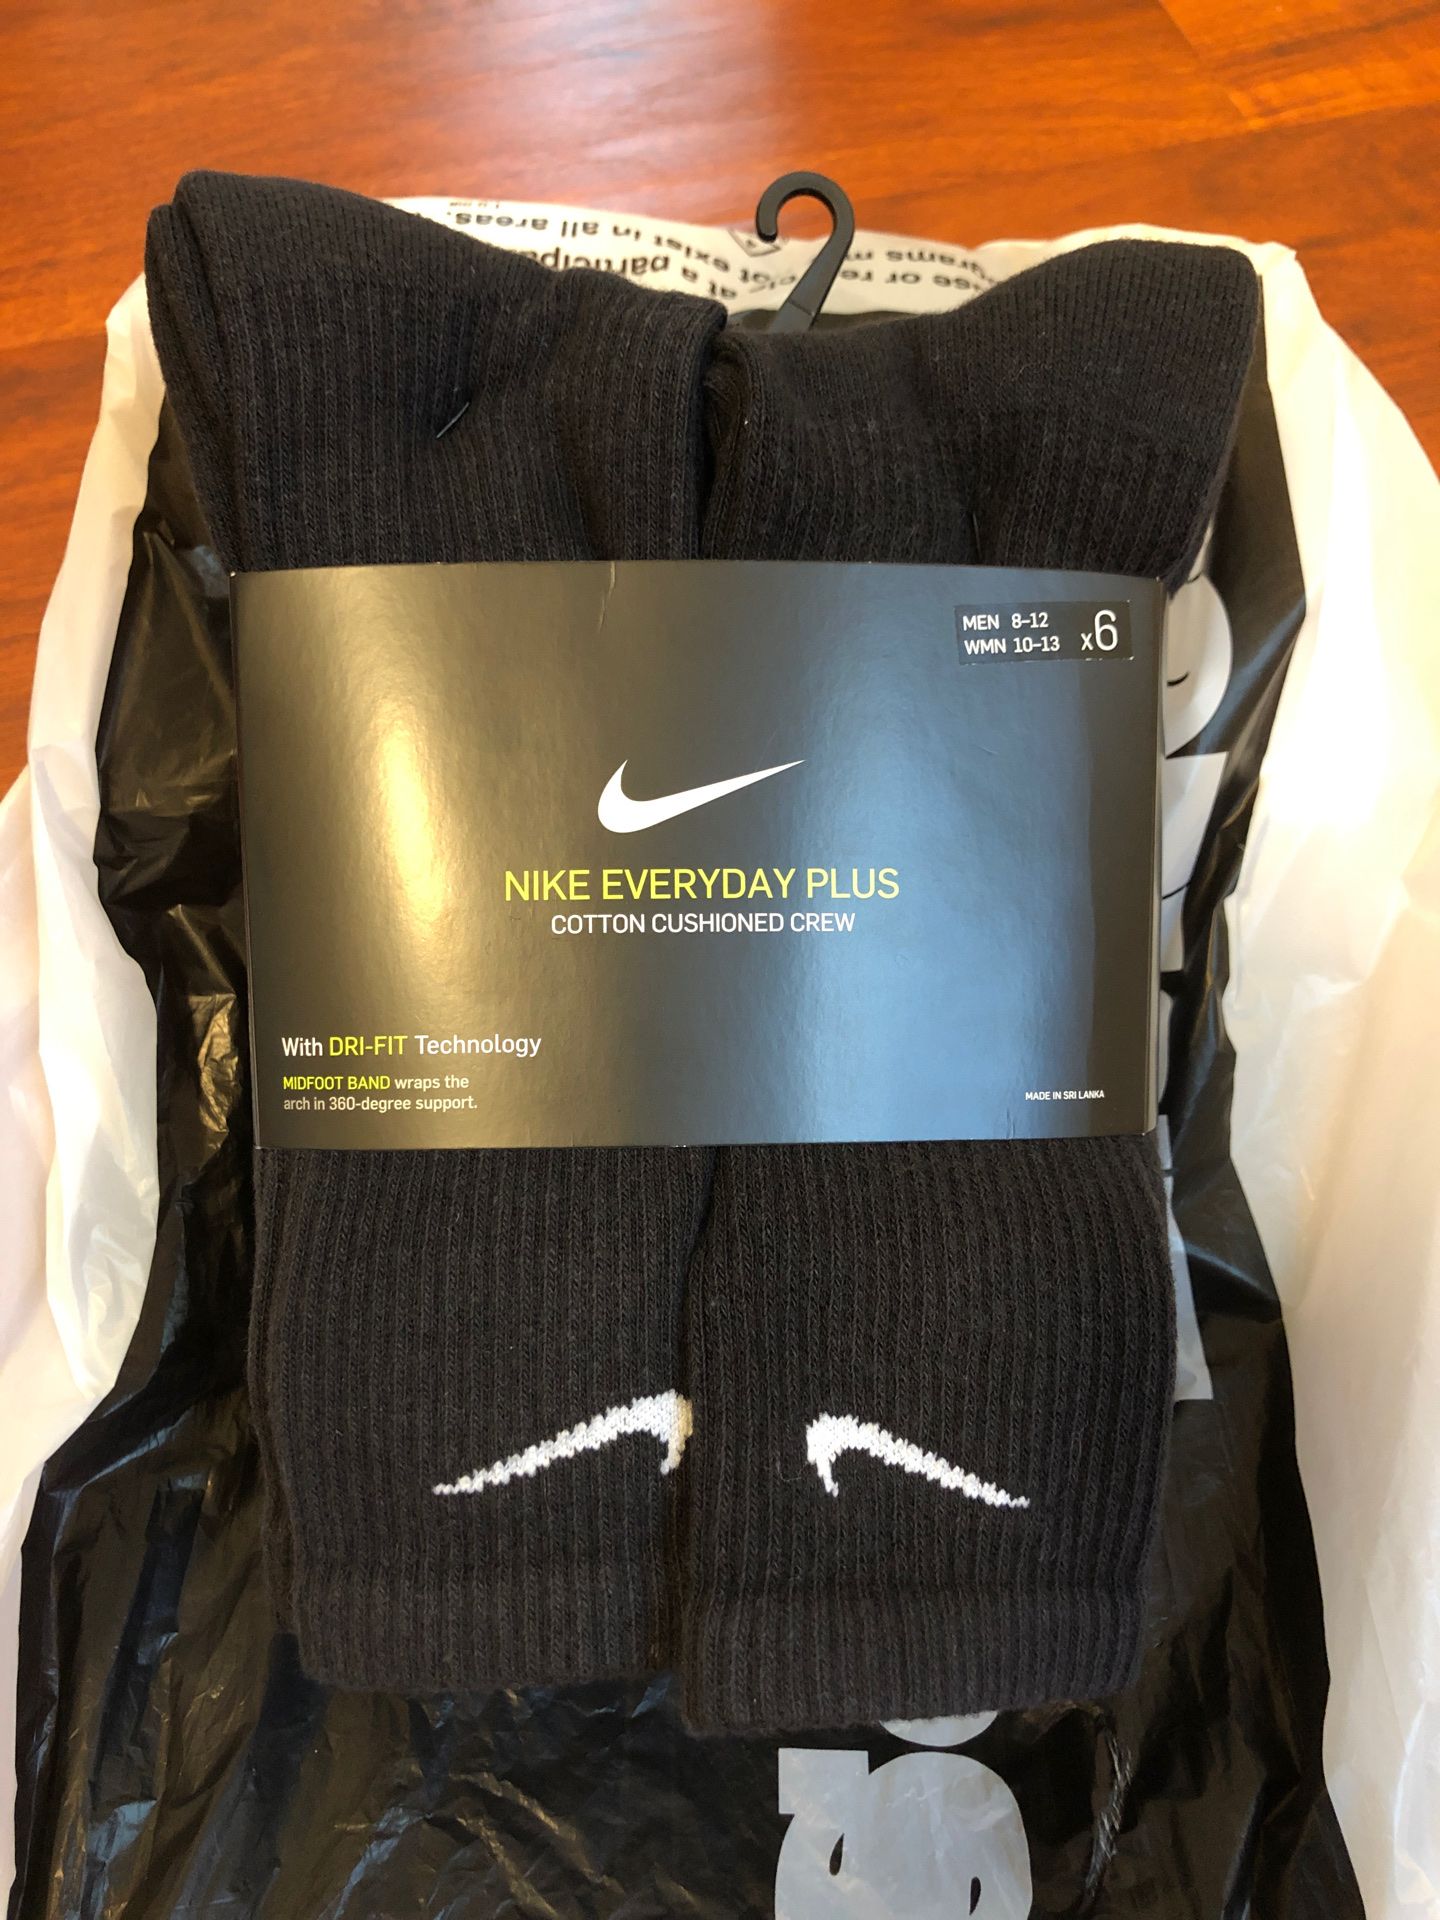 Nike Everyday Plus Cotton Cushioned Crew With Dri-Fit Technology Socks （6 Pairs）New！with label SIZE L Men 8-12 WMN 10-13